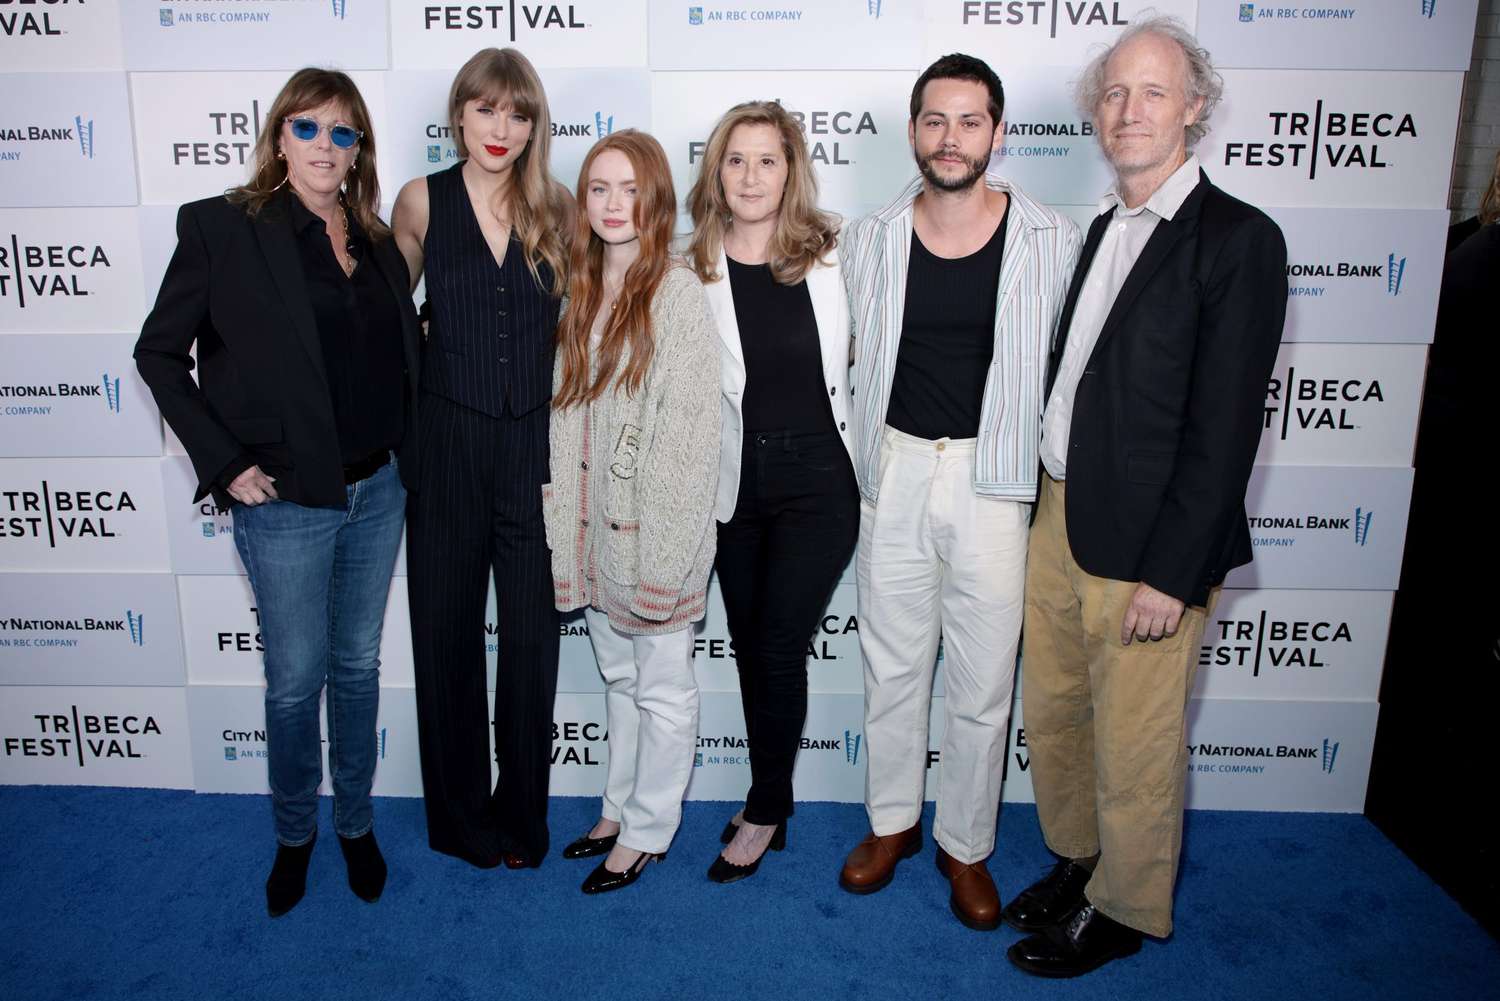 NEW YORK, NEW YORK - JUNE 11: (L-R) Jane Rosenthal, Tyalor Swift, Sadie Sink, Paula Weinstein, Dylan O'Brien, and Mike Mills attend Storytellers – Taylor Swift with Mike Mills during the 2022 Tribeca Festival at Beacon Theatre on June 11, 2022 in New York City. (Photo by Dimitrios Kambouris/Getty Images for Tribeca Festival )